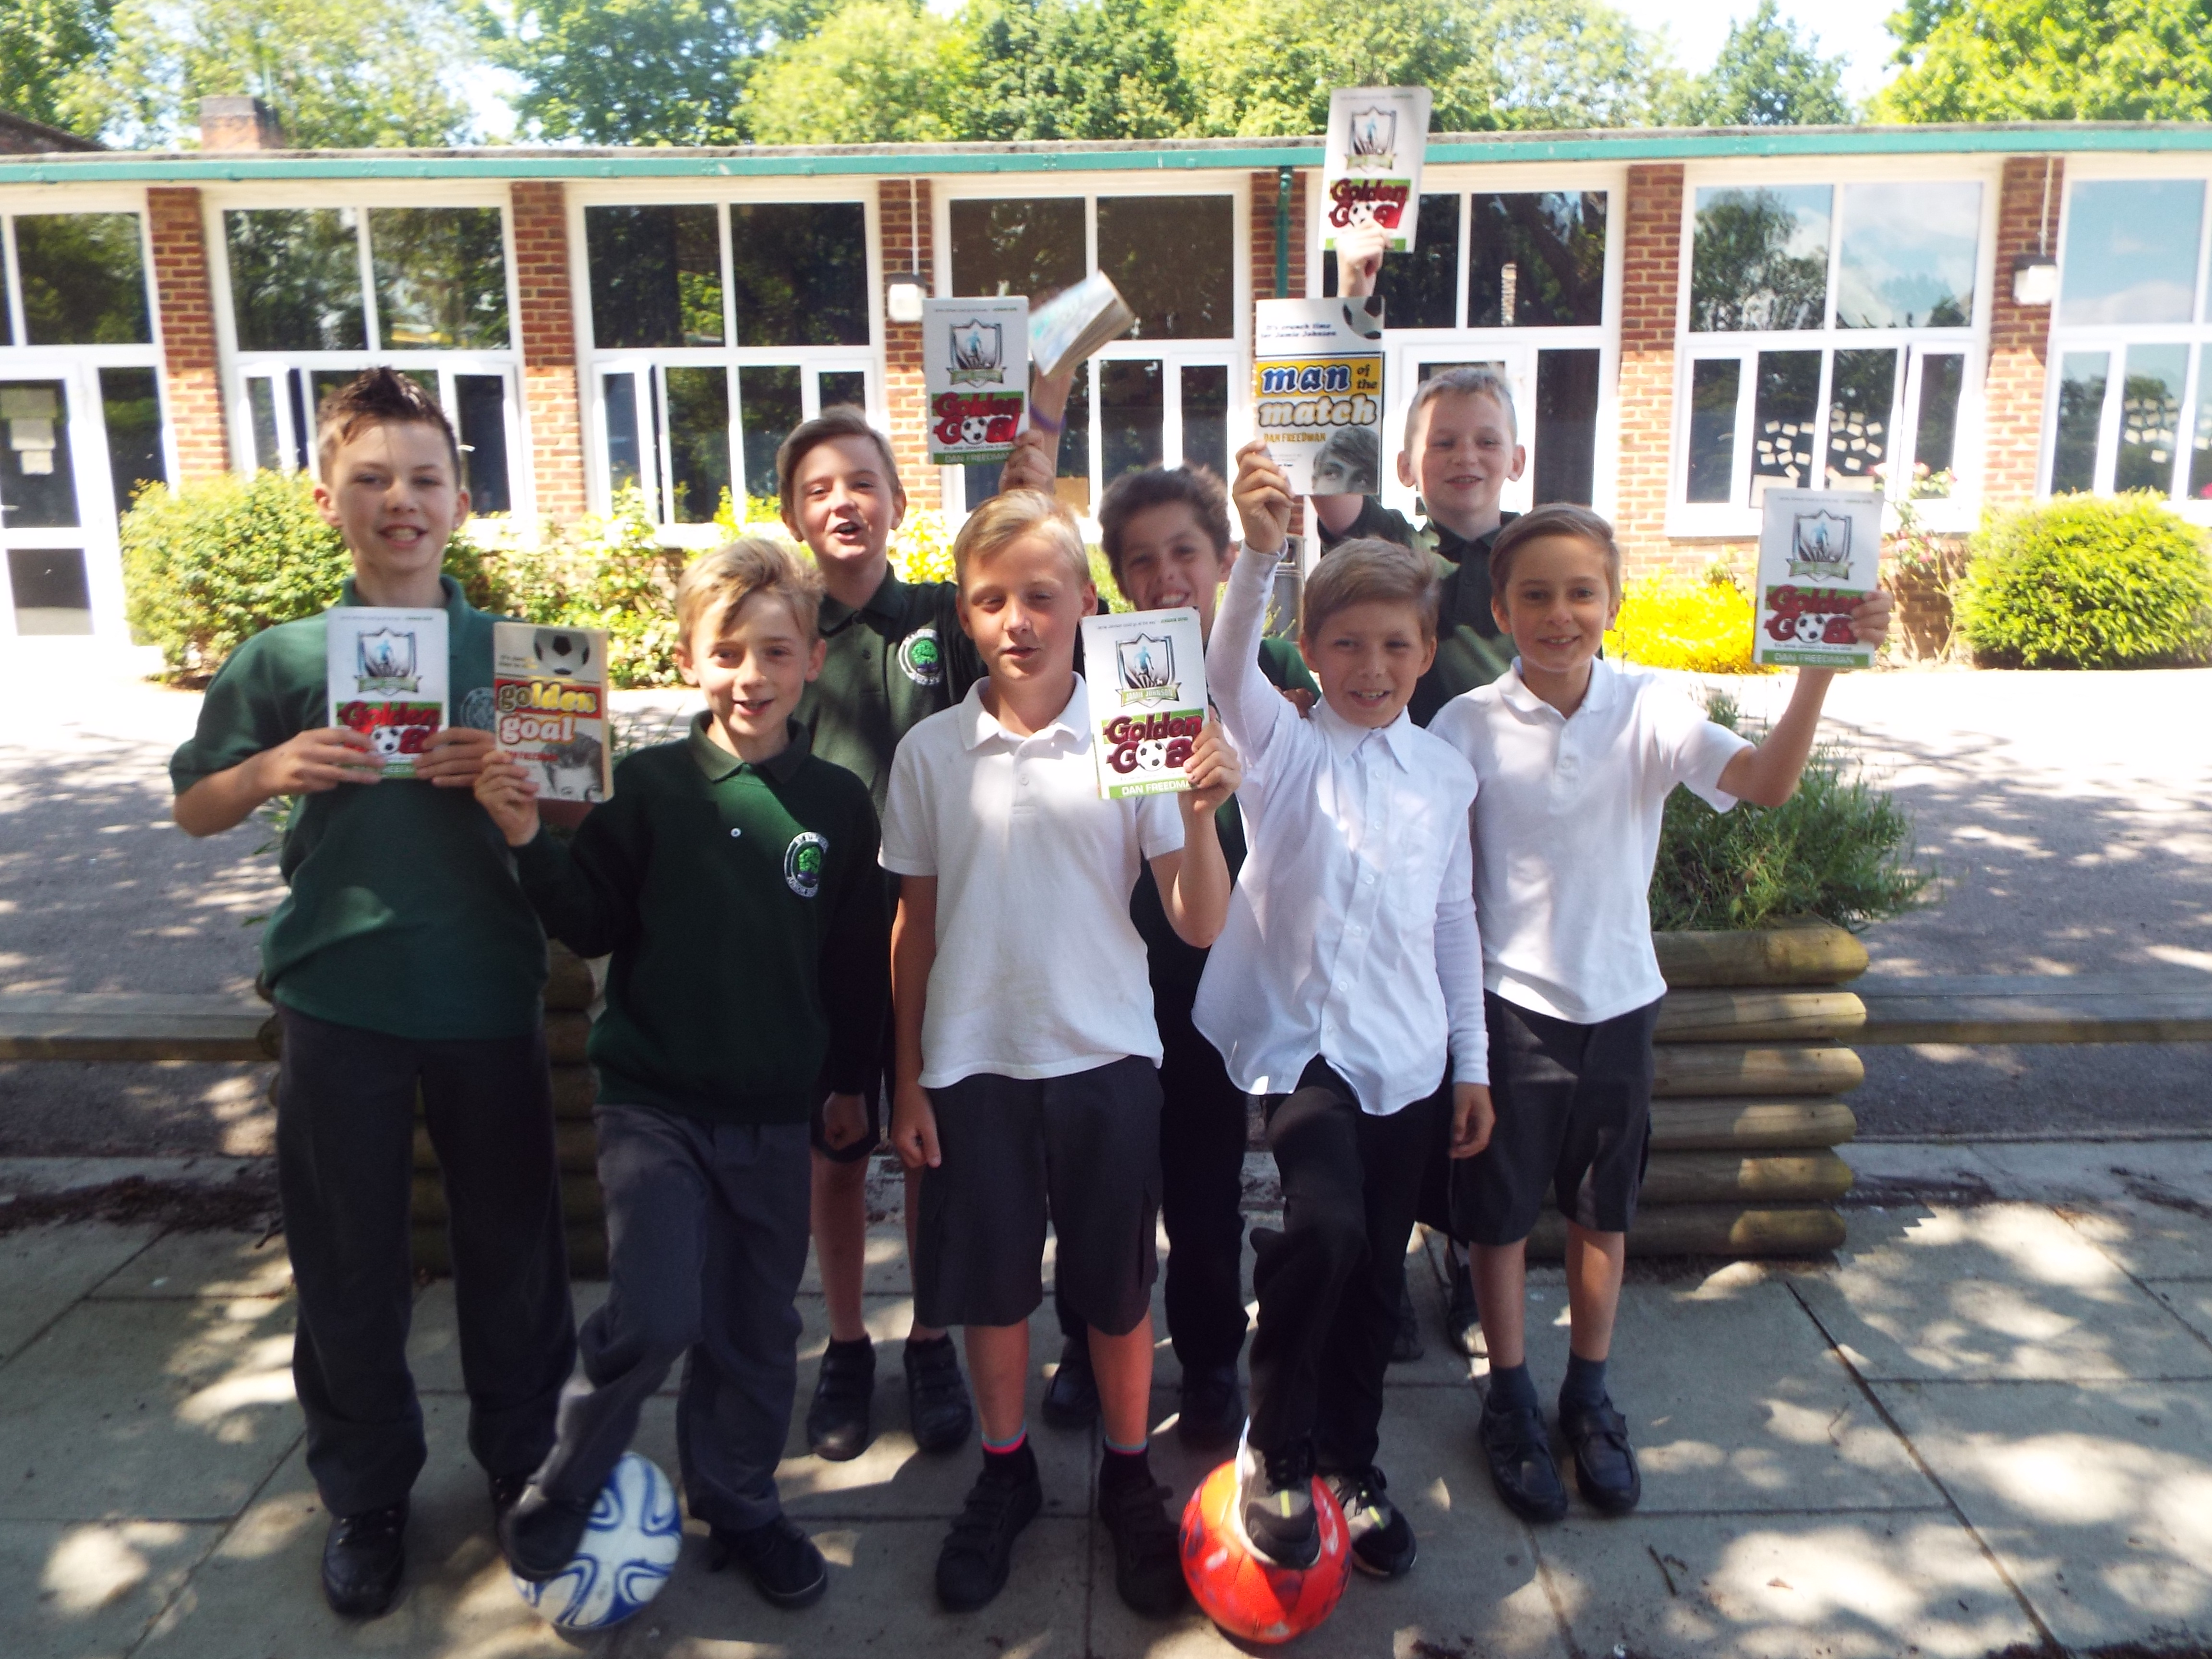 St Stephen's Junior School students with the Jamie Johnson books they are reading